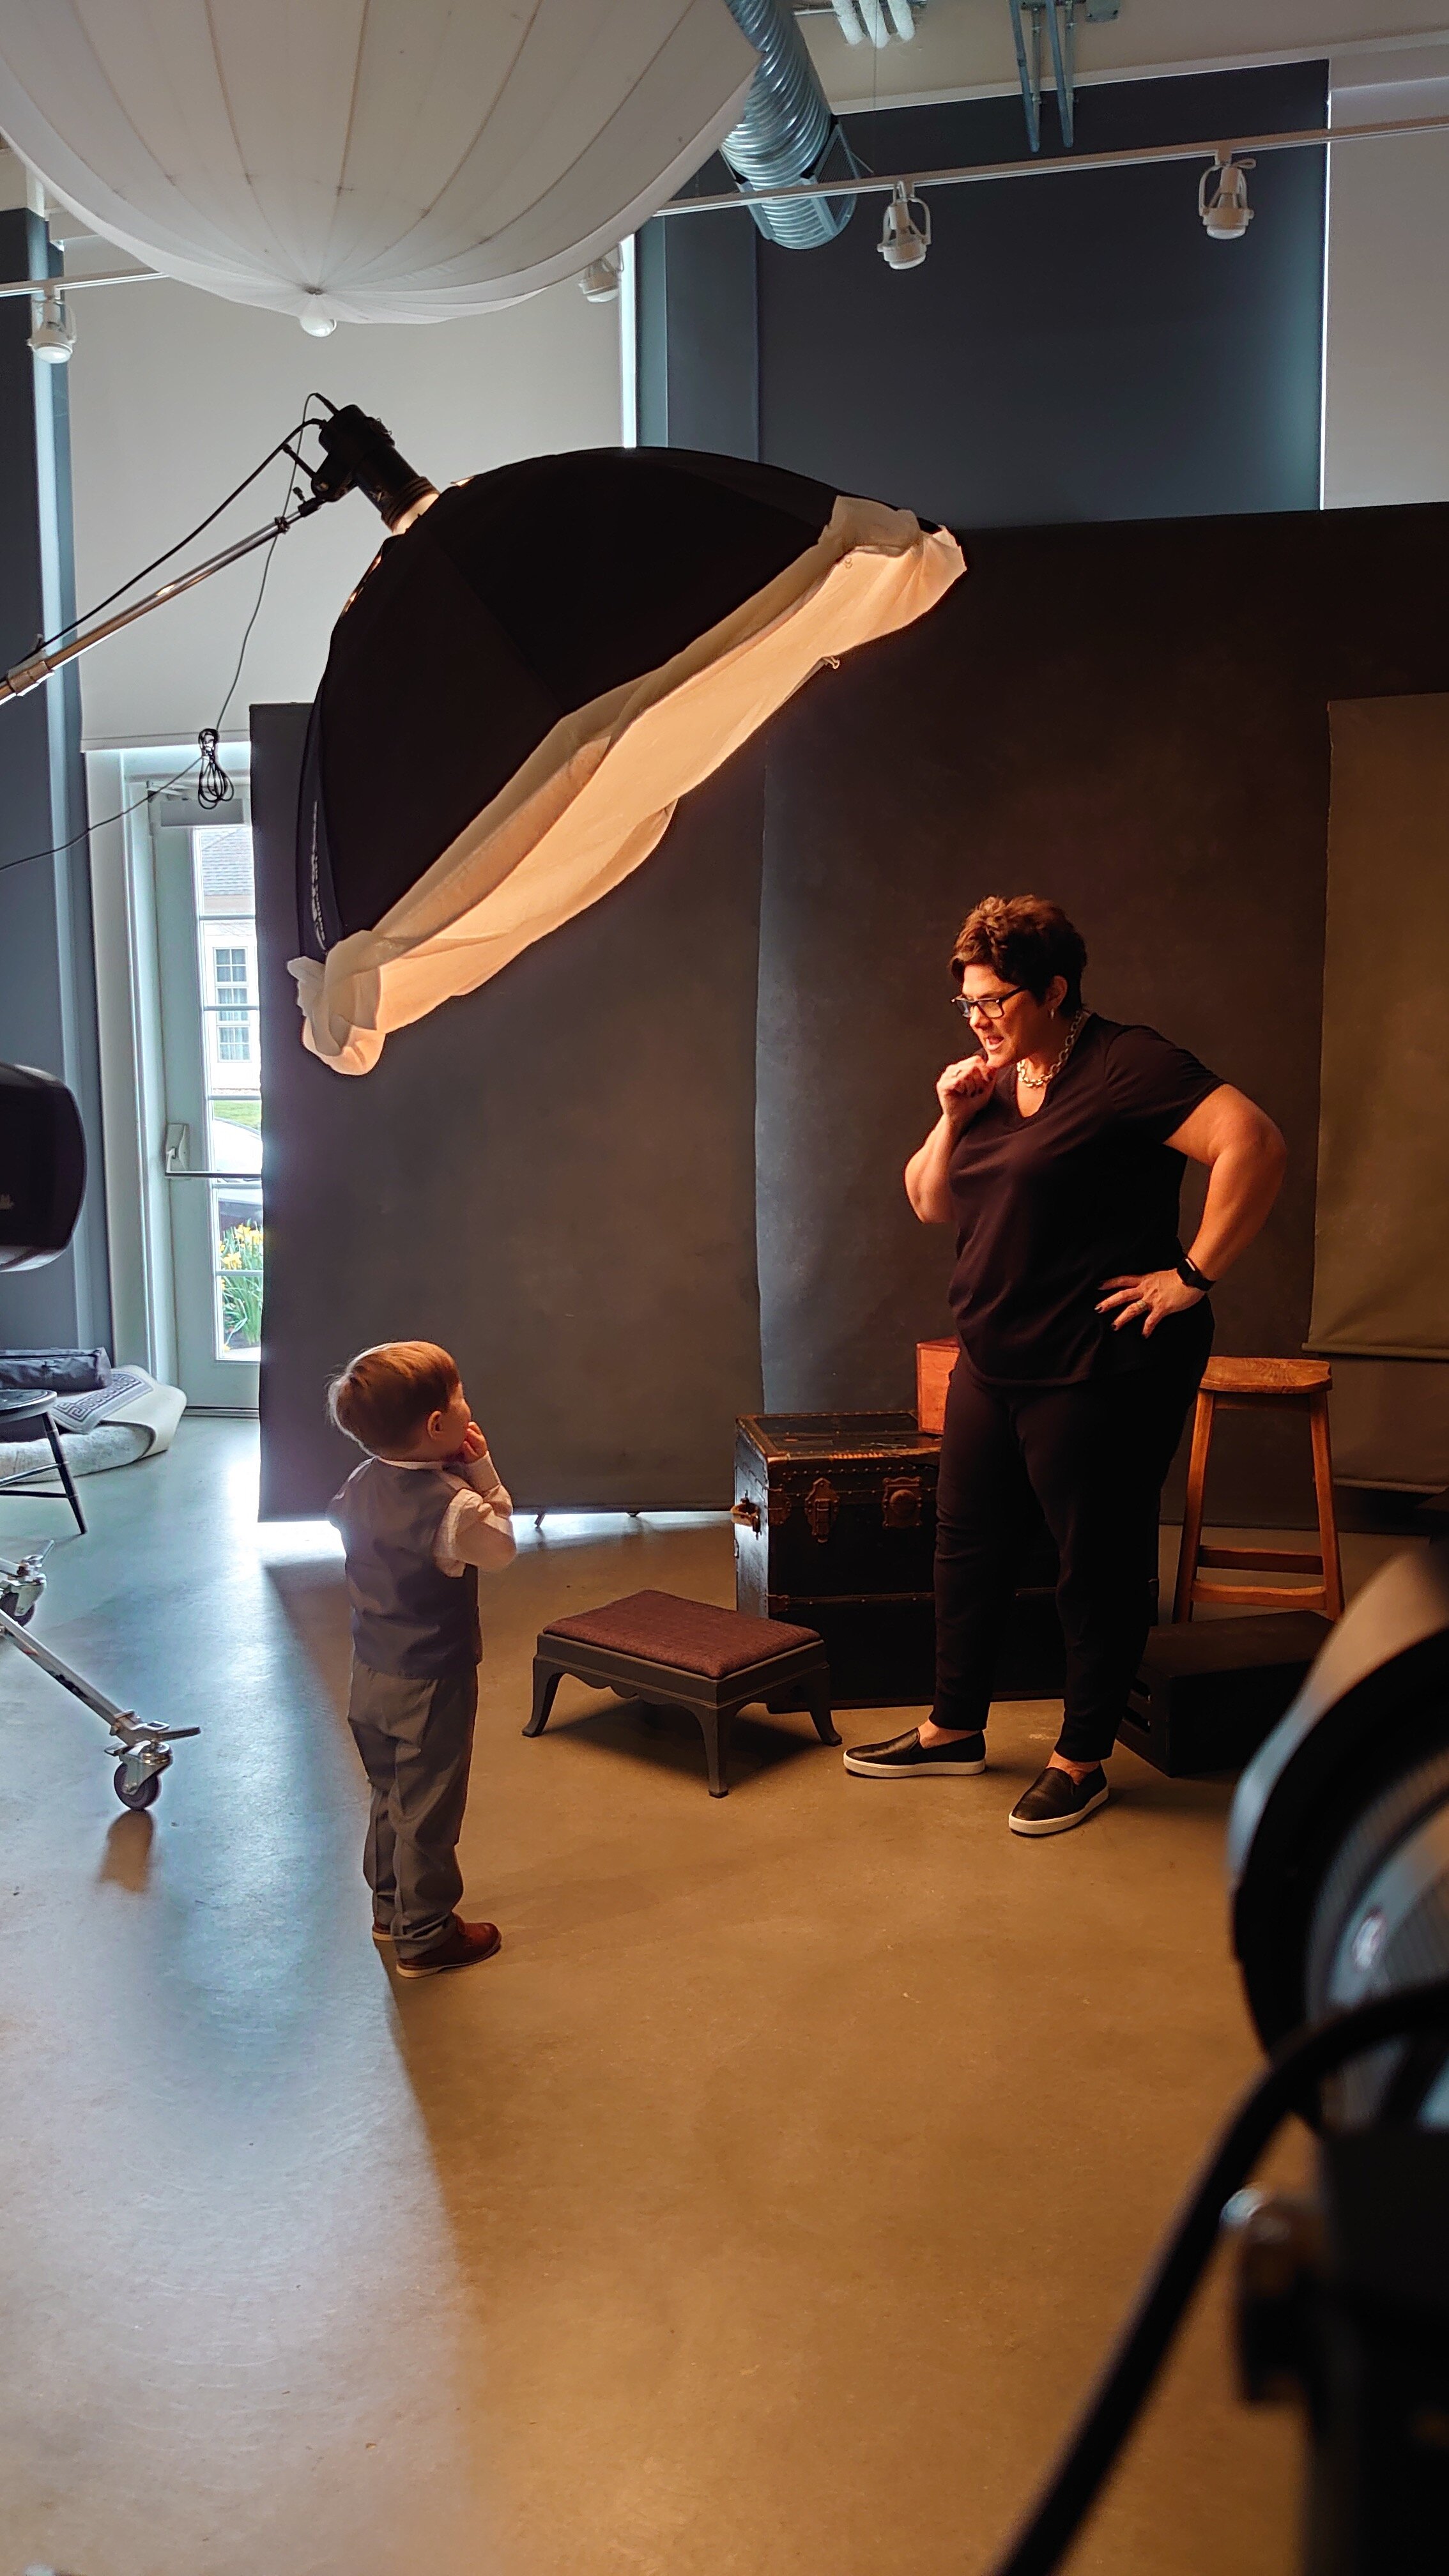 Monica-interacting-with-child-playfully-in-studio-family-session-black-label